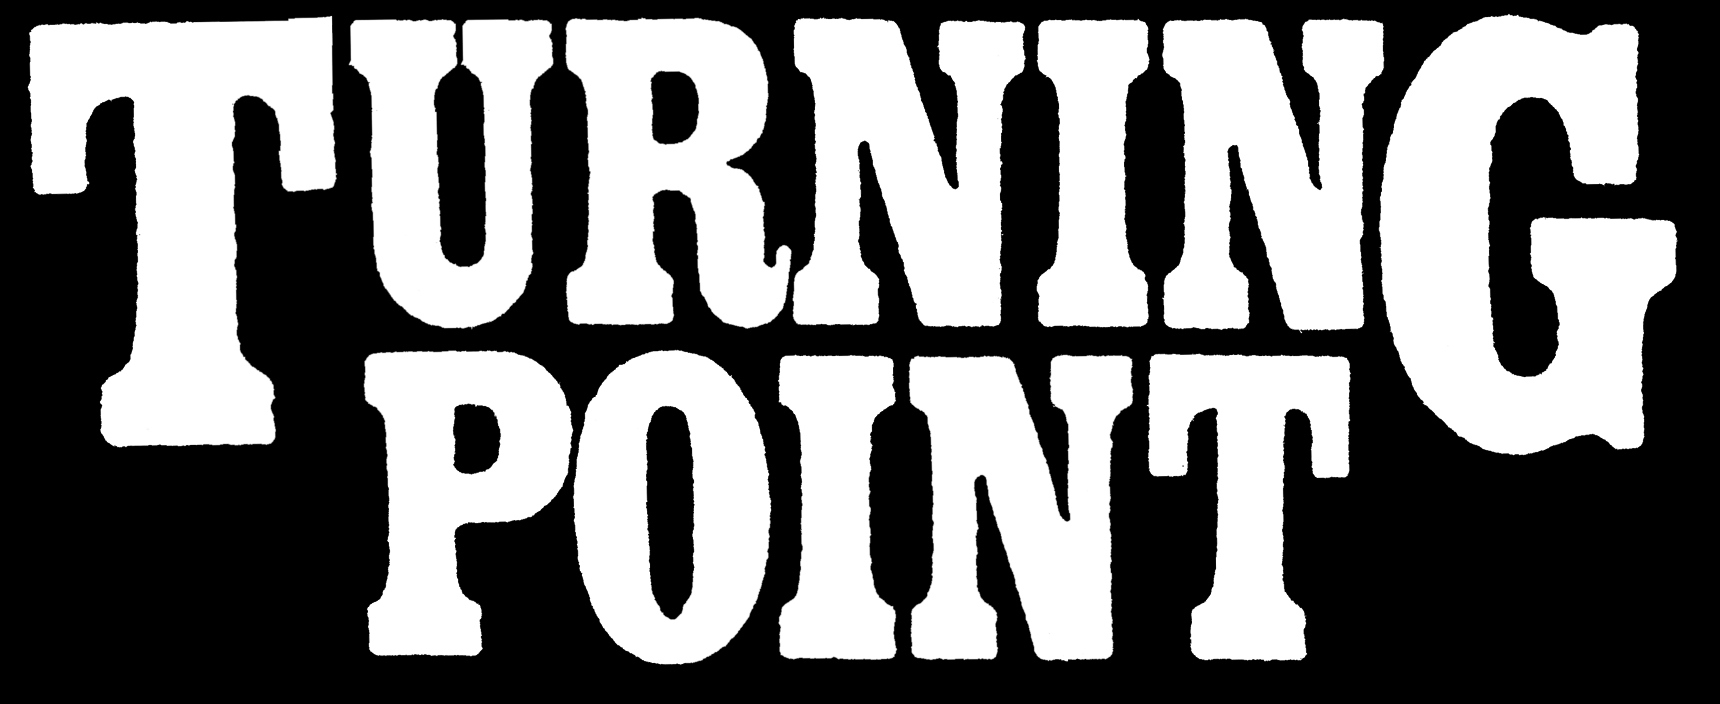 TURNING POINT discography and reviews